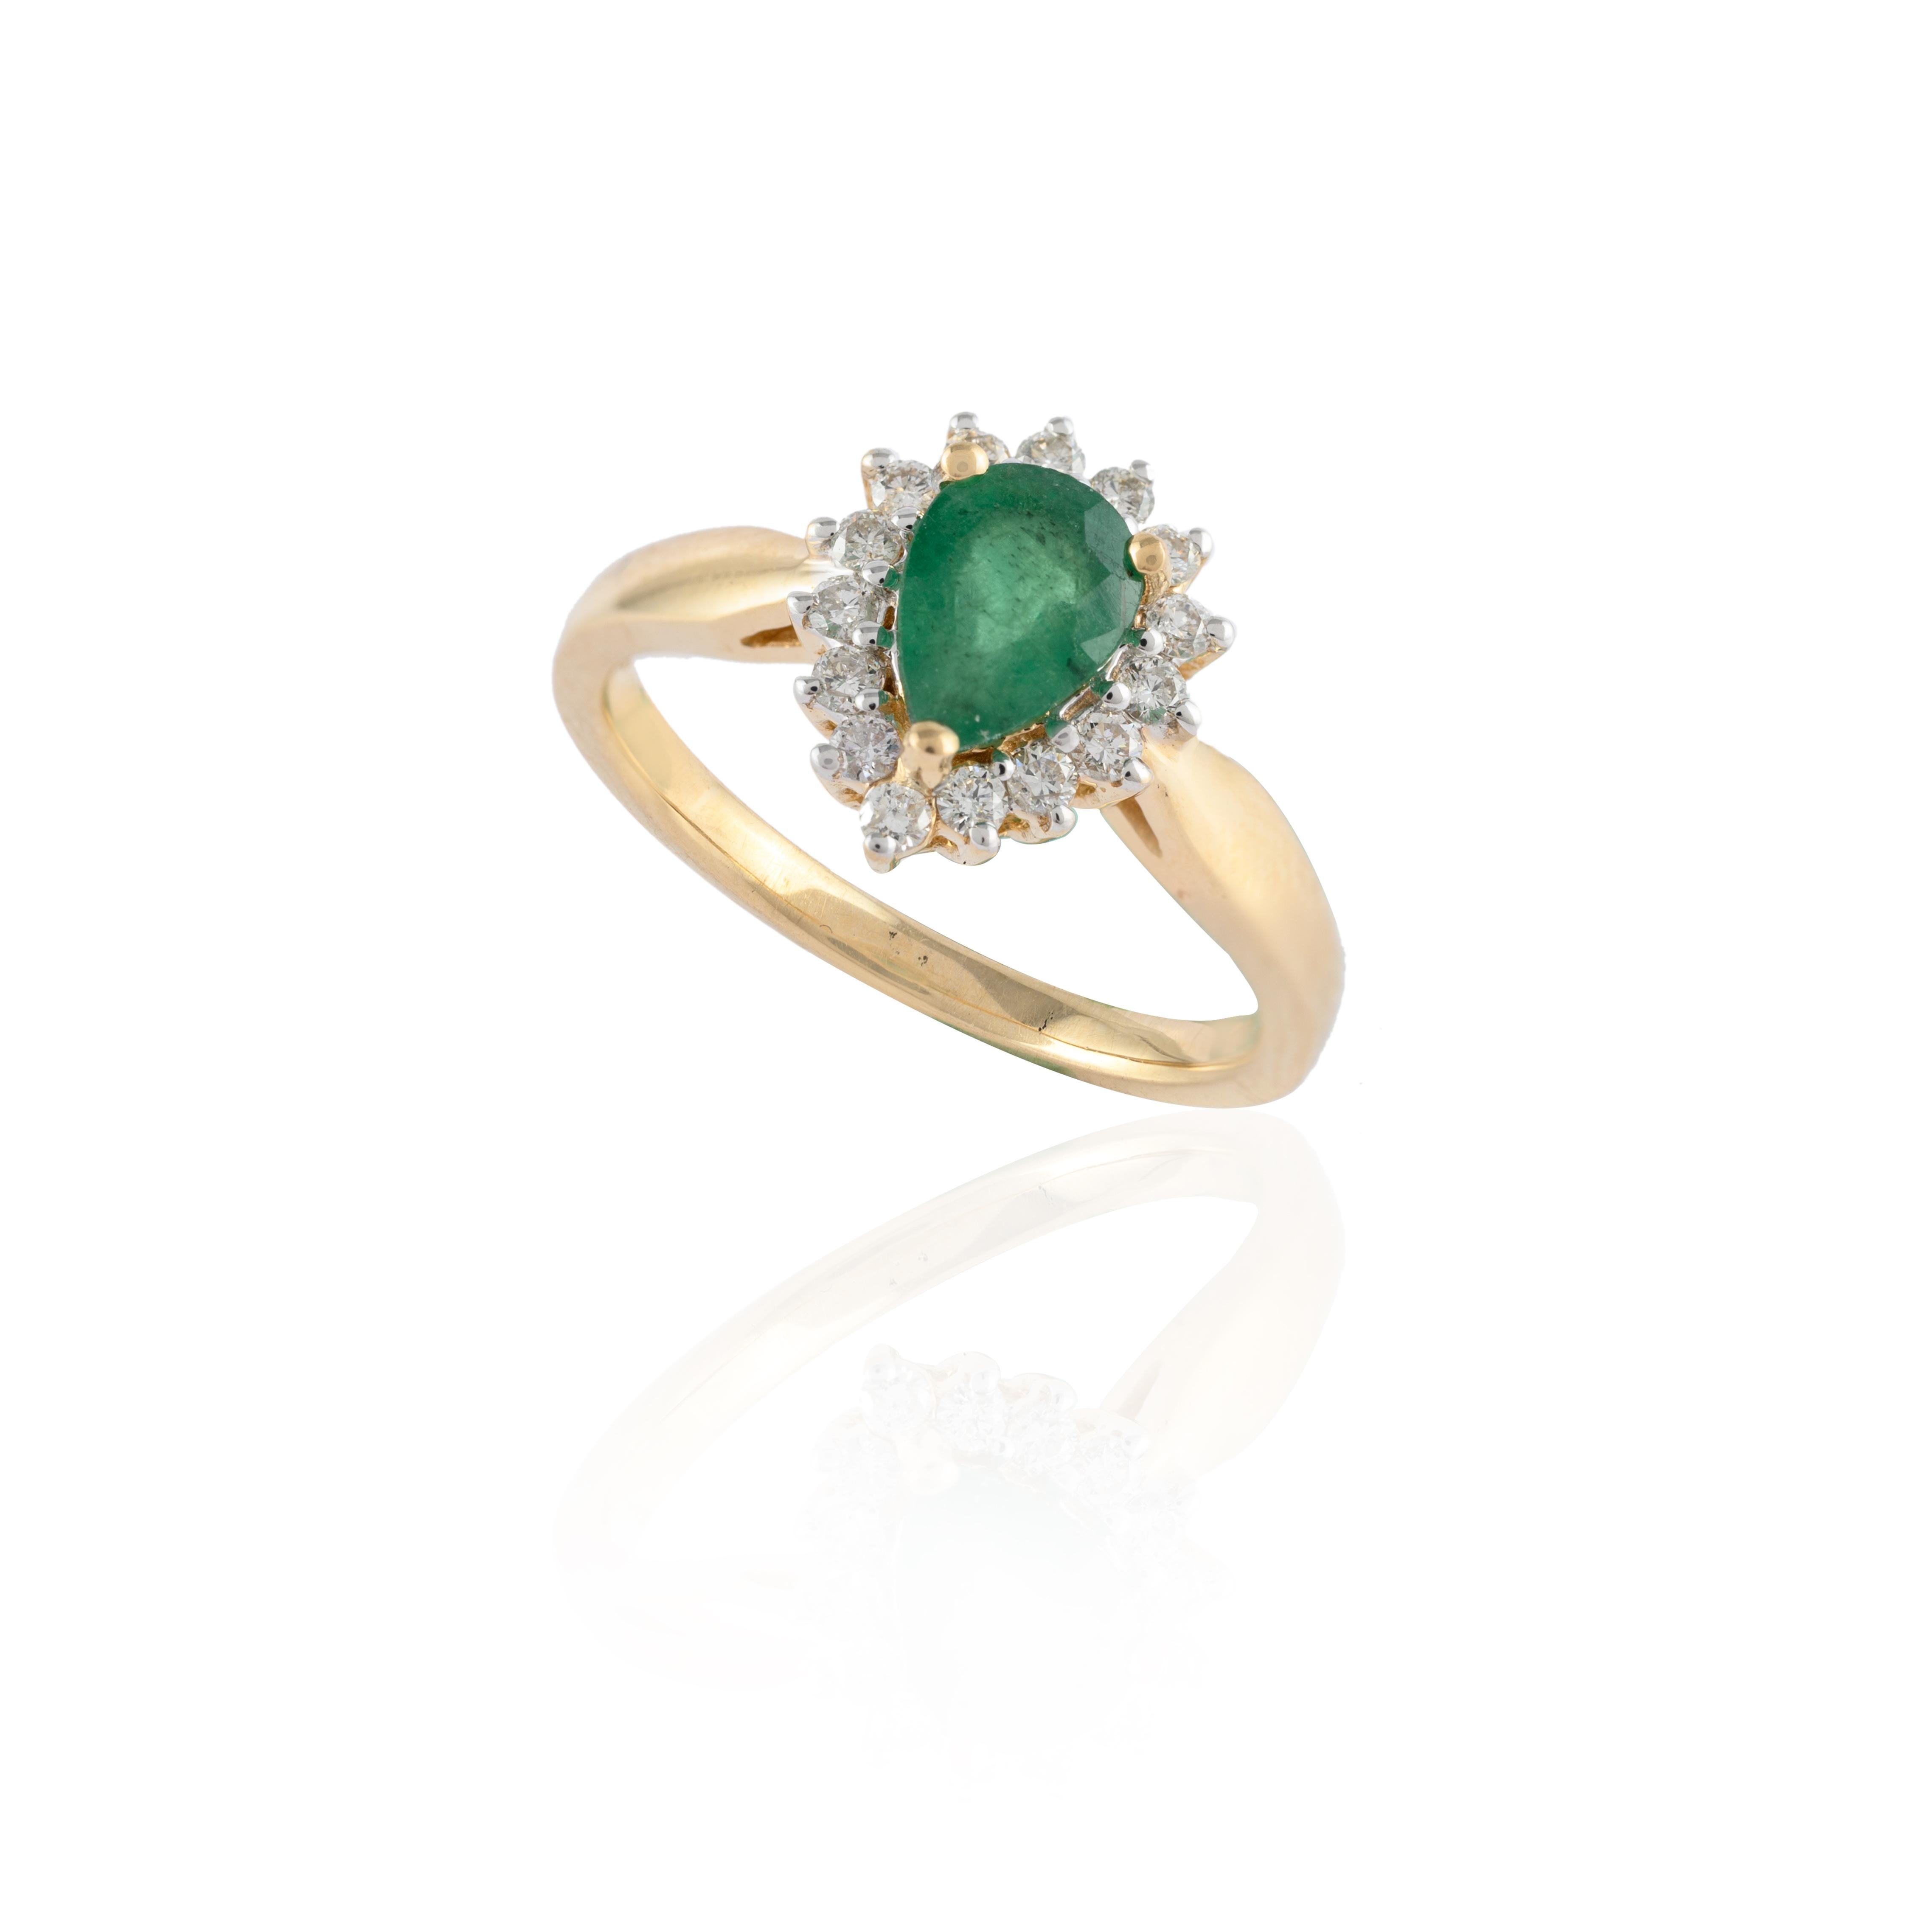 For Sale:  Pear Cut Emerald and Halo Diamond Wedding Ring Crafted in 14k Solid Yellow Gold 5